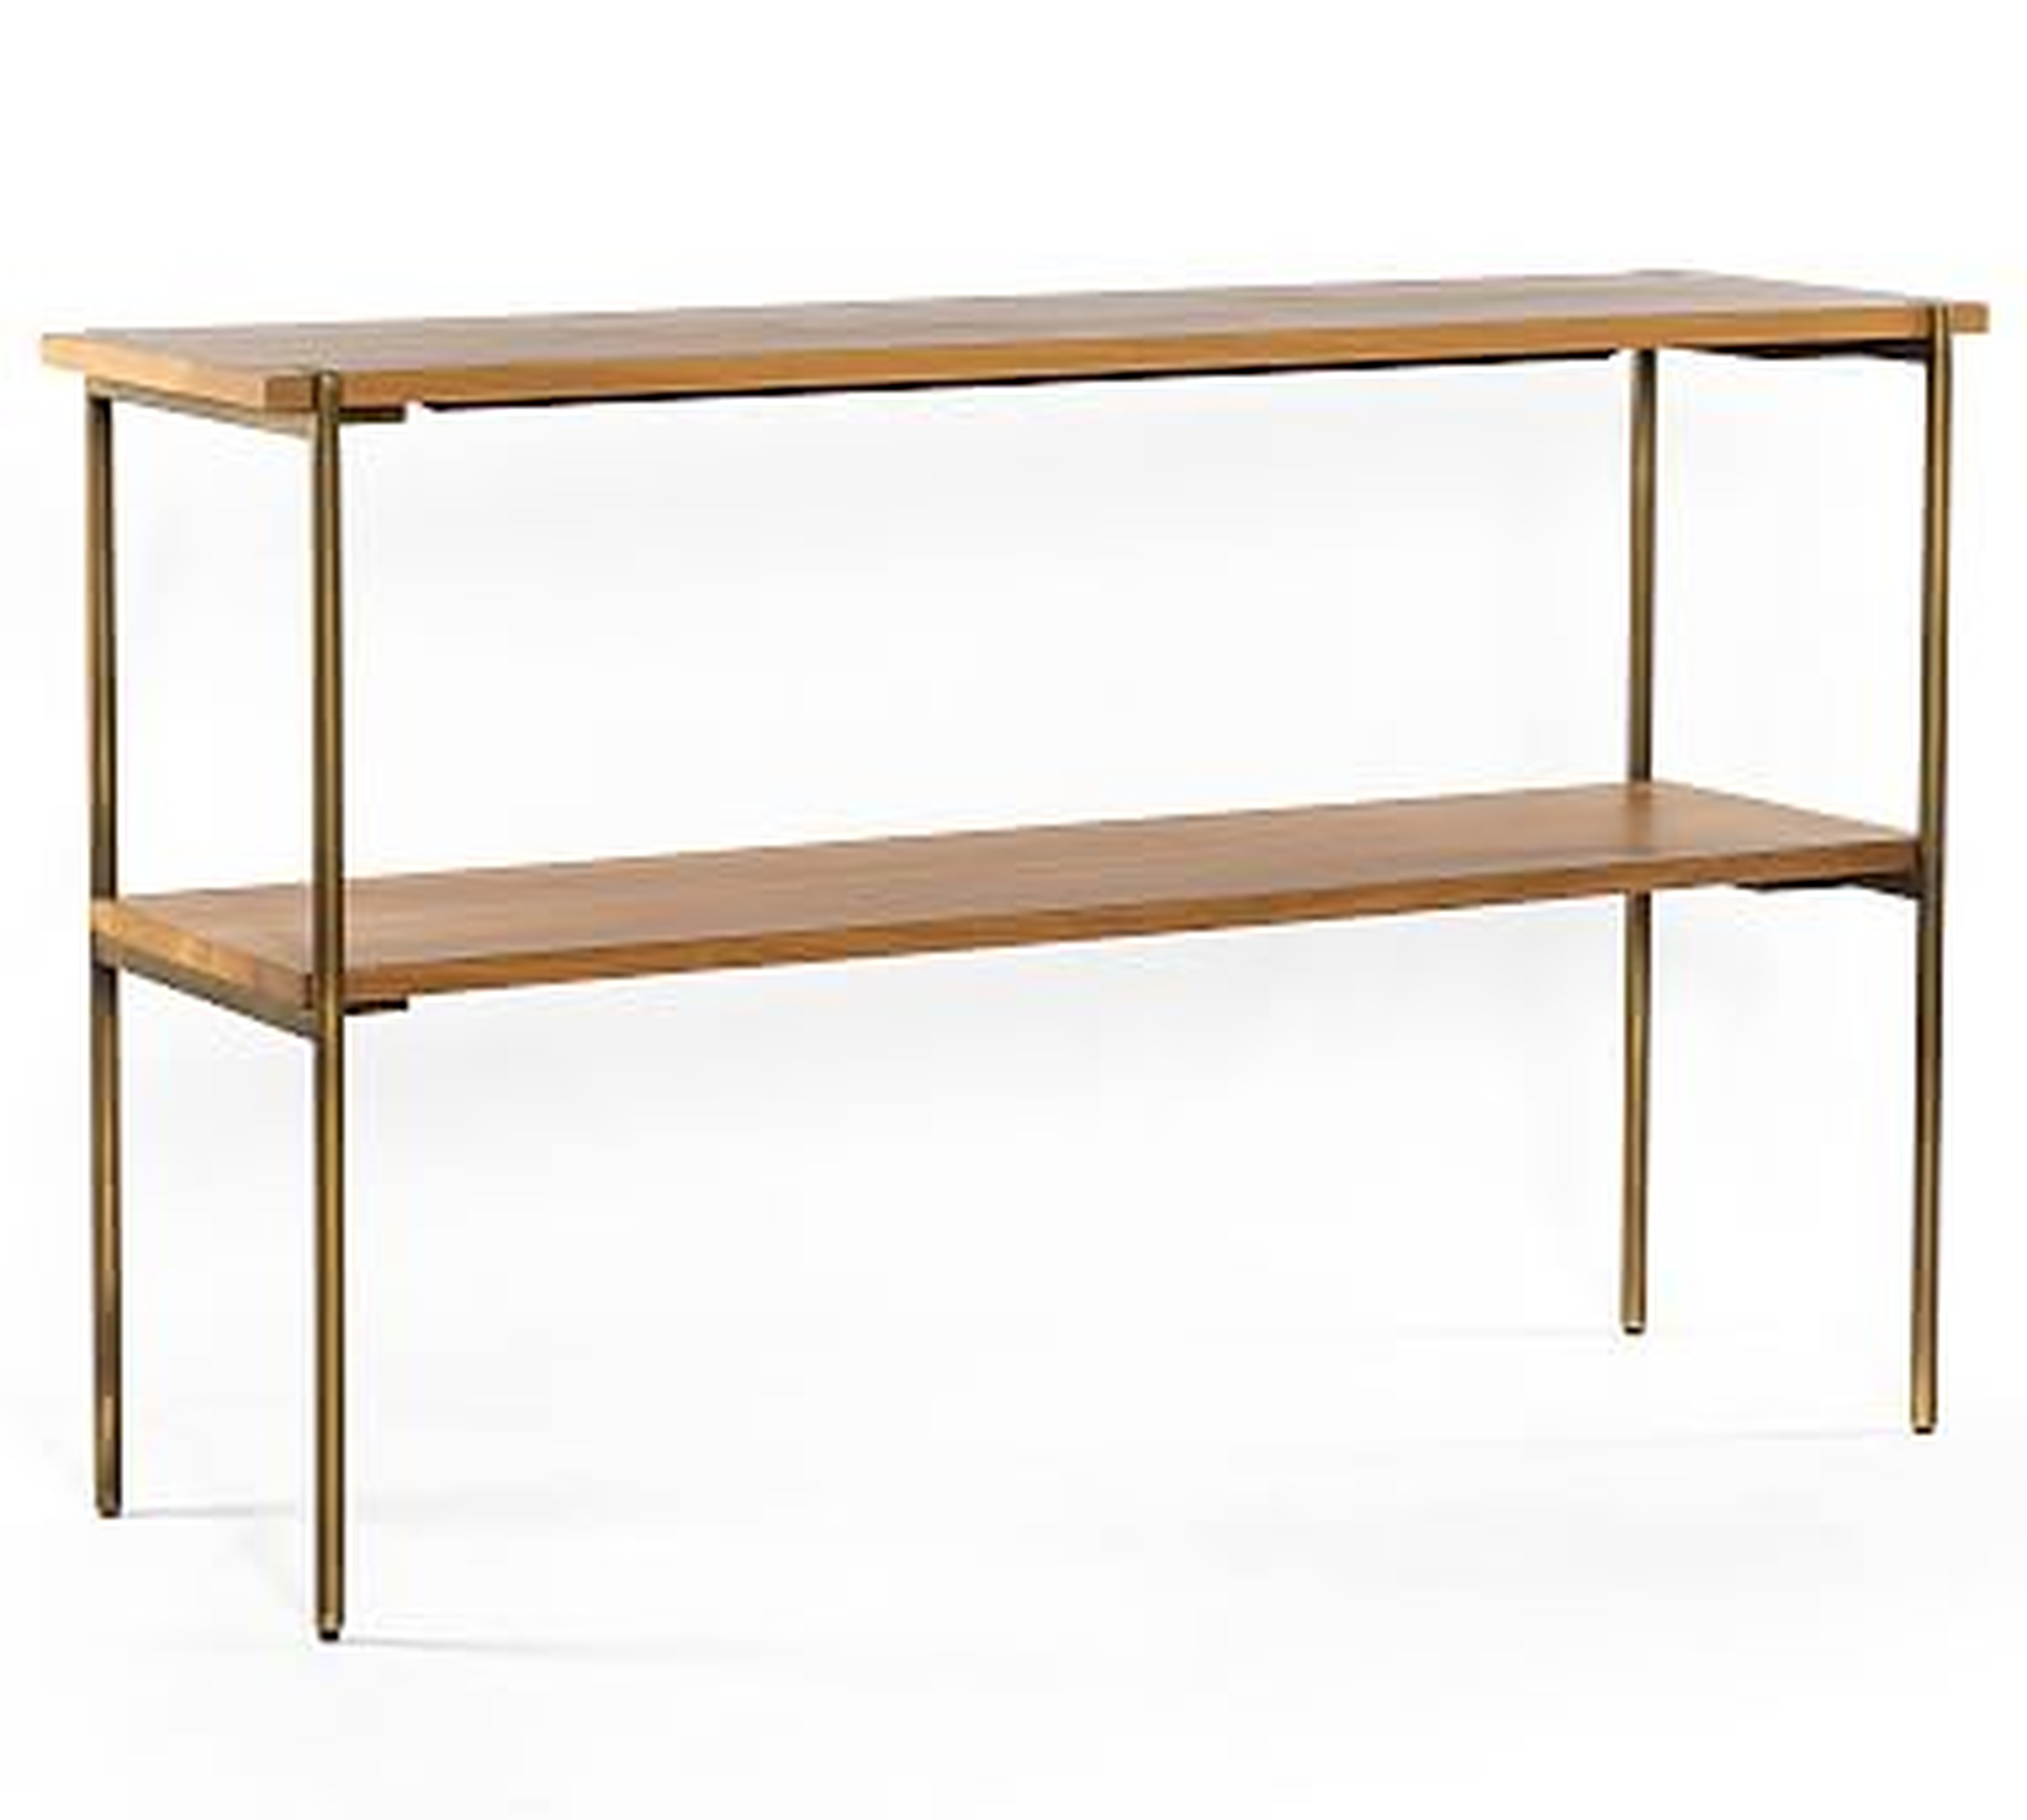 Archdale Console Table, Satin Brass &amp; Natural Oak - Pottery Barn